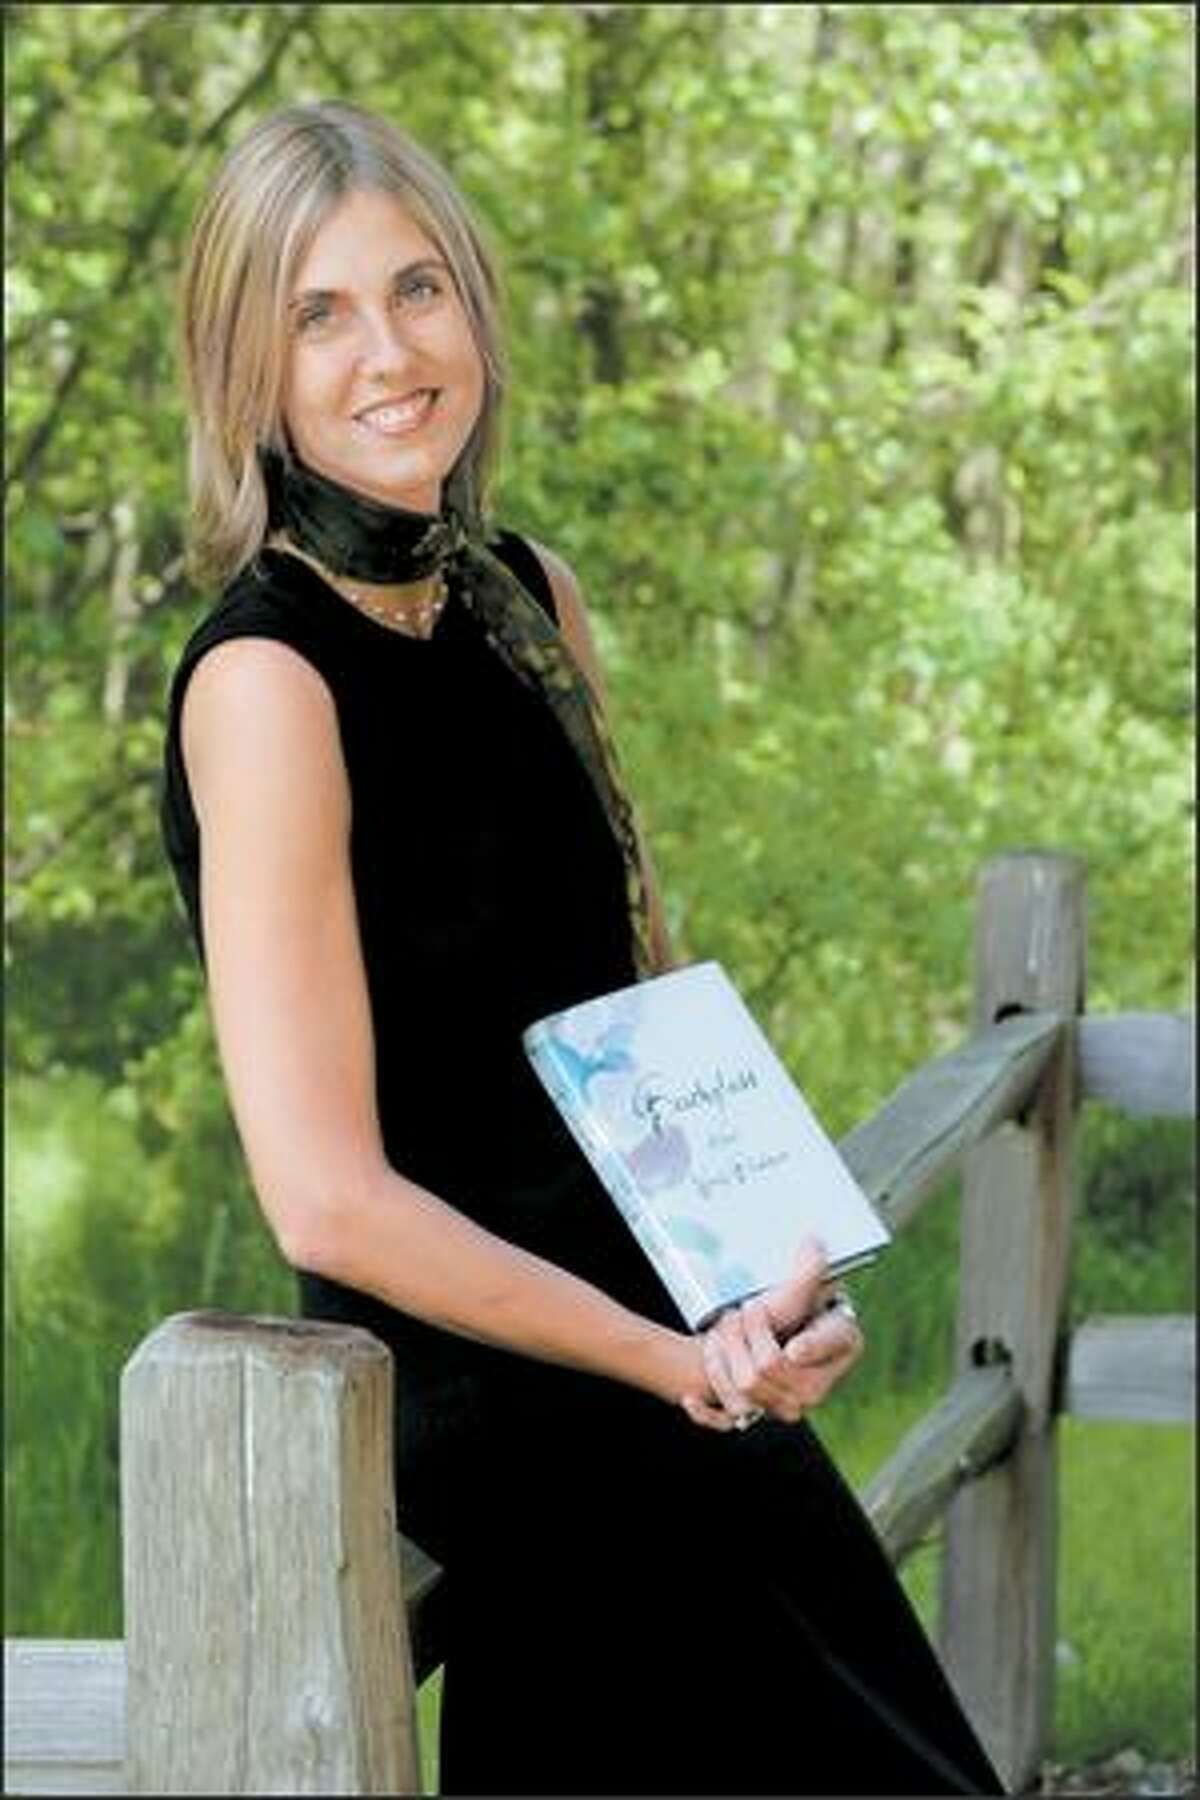 Wendy Blackburn's first novel, "Beachglass," spotlights addicts' recovery rather than their substance abuse. "One of my goals is to show that people in recovery can be successful ... not the stereotype of creepy addicts," said the chemical-dependency counselor at a women-only facility in Kirkland.